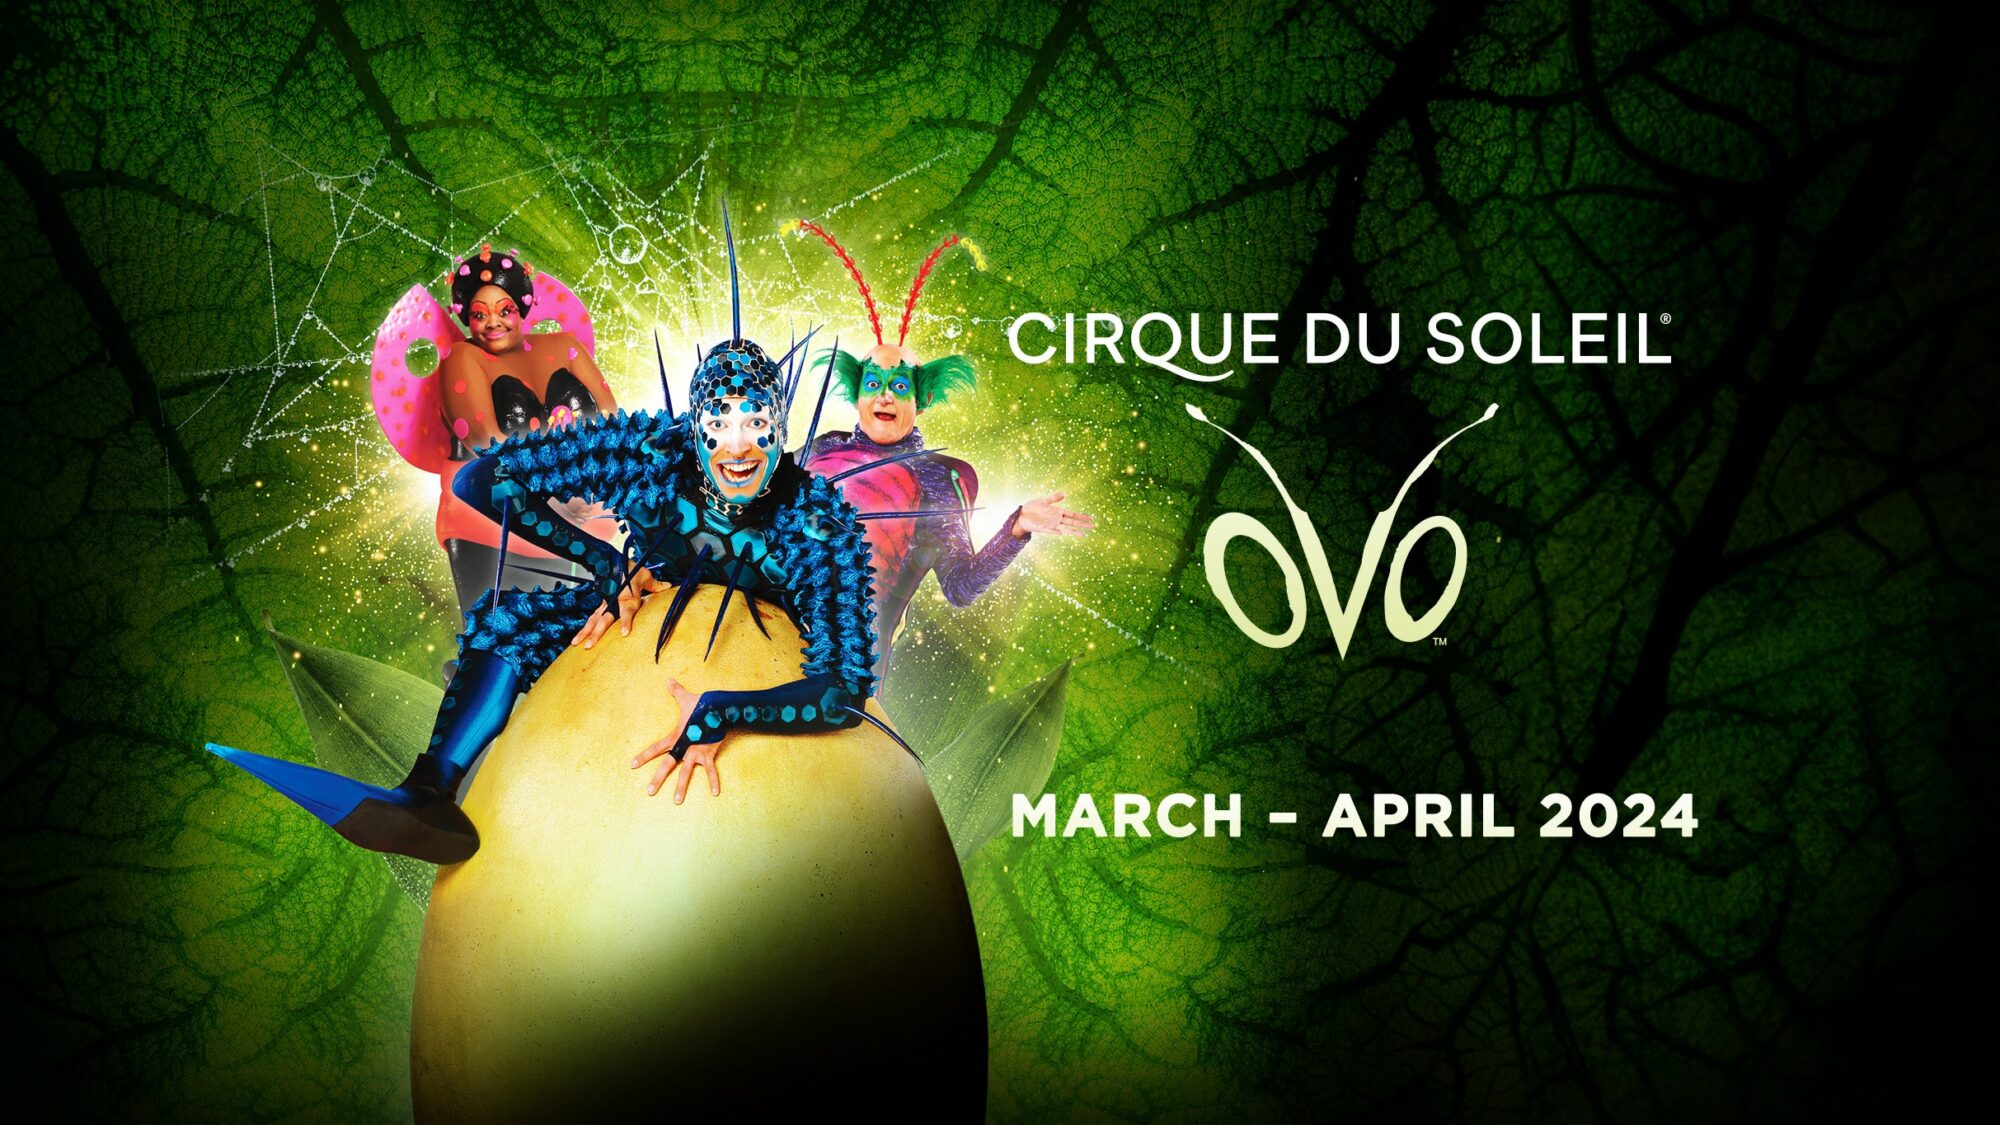 Image name Cirque Du Soleil Ovo at First Direct Arena Leeds the 13 image from the post Cirque Du Soleil : Ovo at First Direct Arena, Leeds in Yorkshire.com.